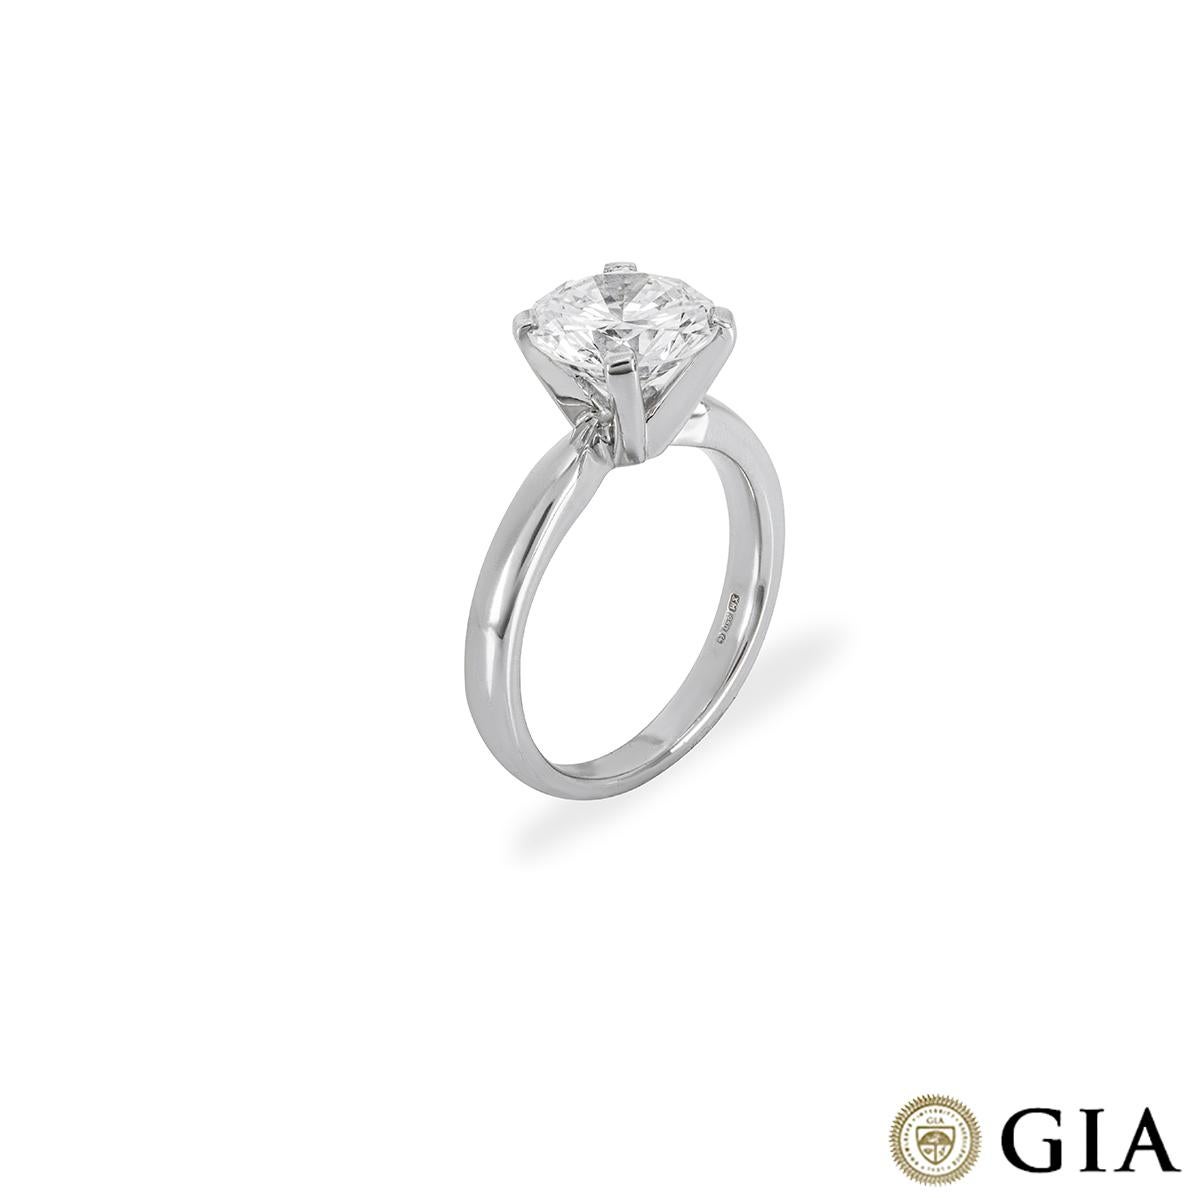 A beautiful platinum diamond engagement ring. The solitaire is adorned with a round brilliant cut diamond set in a four prong mount, weighing 2.24ct, I colour and VS2 in clarity. The 2.5mm ring has a gross weight of 5.95 grams and is currently a UK